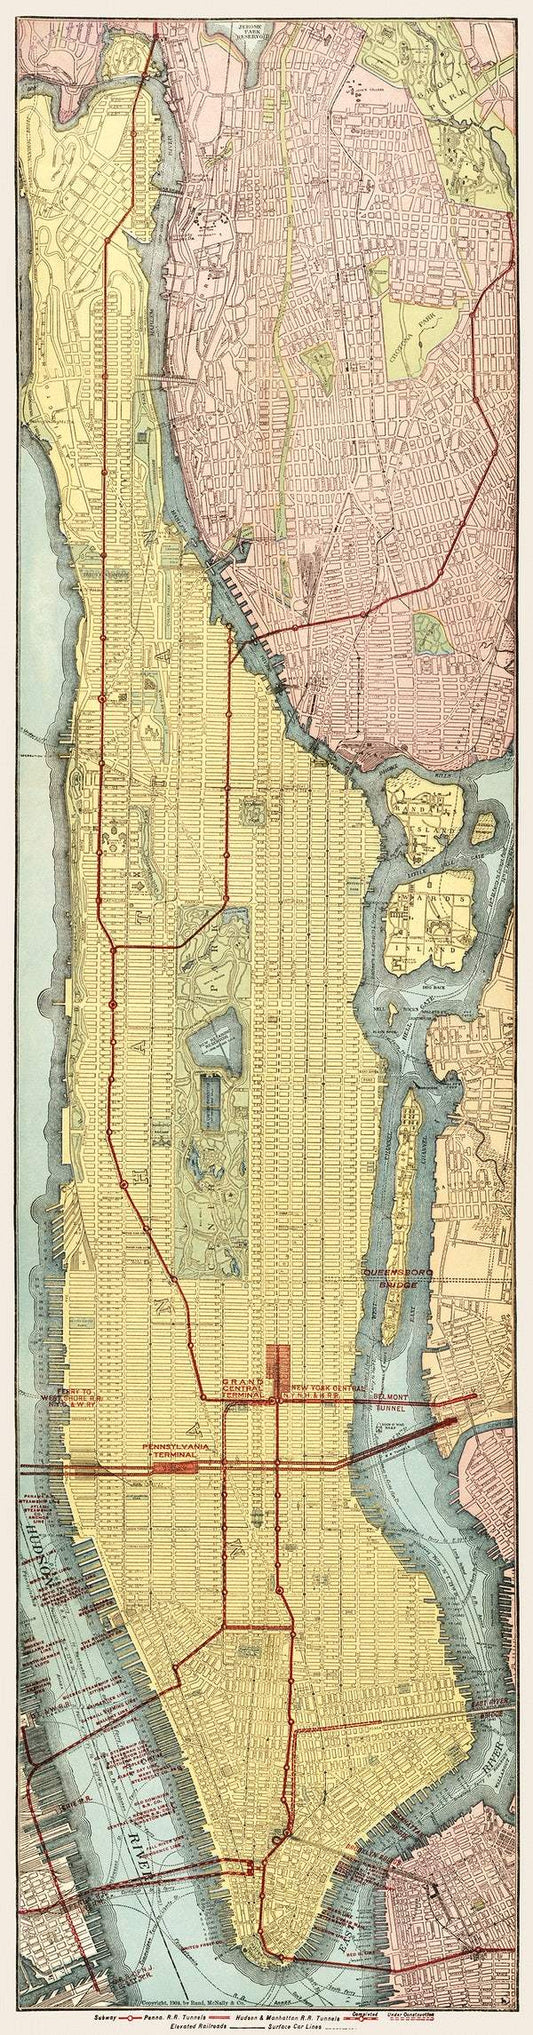 Rapid transit map of Manhattan and adjacent districts of New York City (1908) by Rand McNally and Company